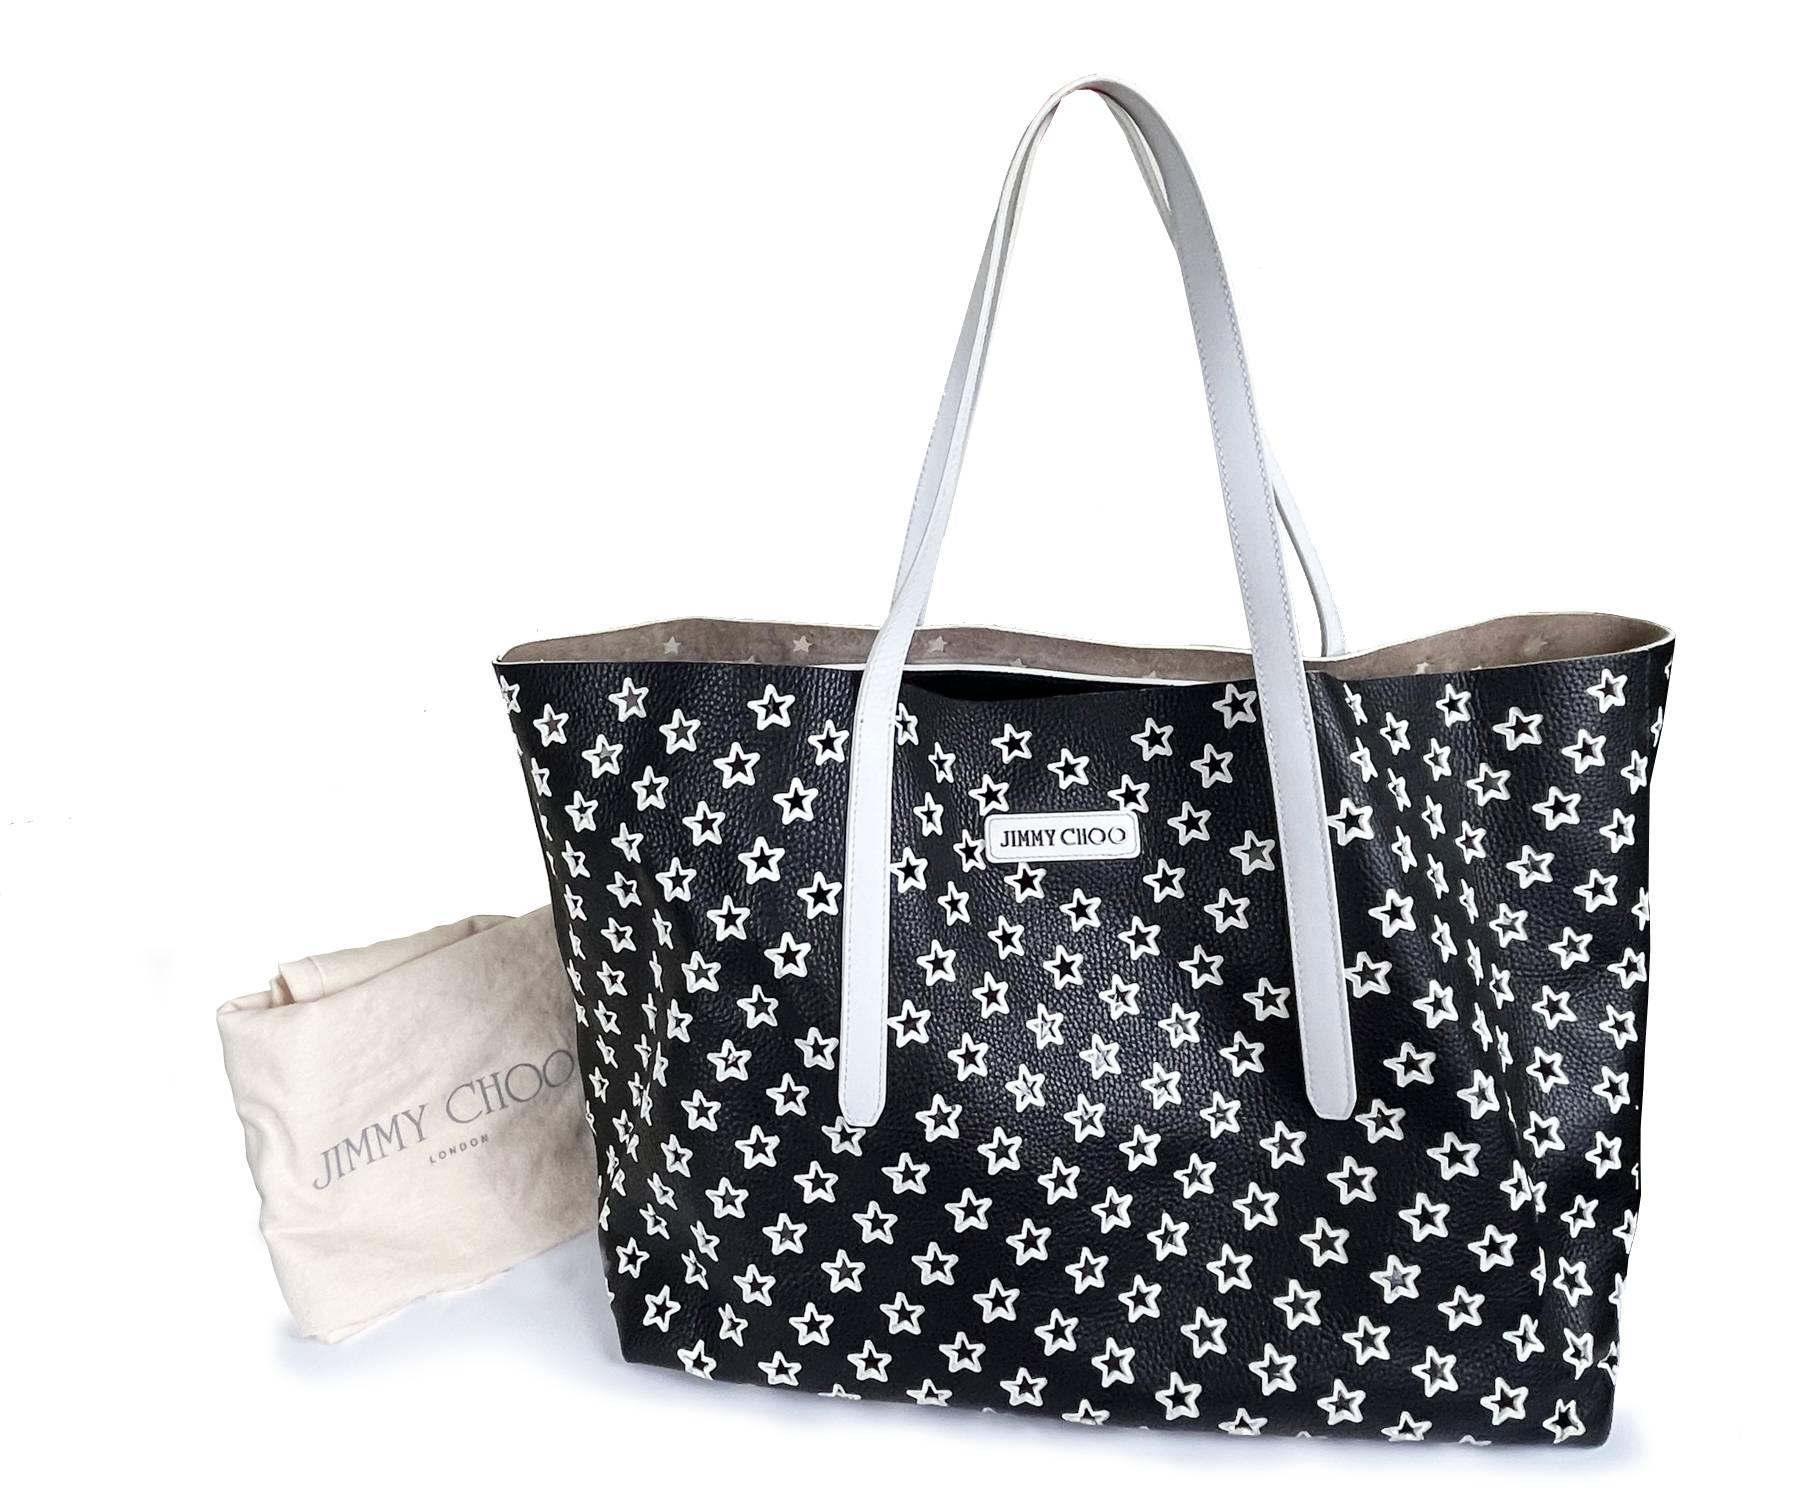 Jimmy Choo White Star Black Large Tote

*Marked Jimmy Choo
*Made in Italy
*Comes with the original dustbag

-It is approximately 15.75